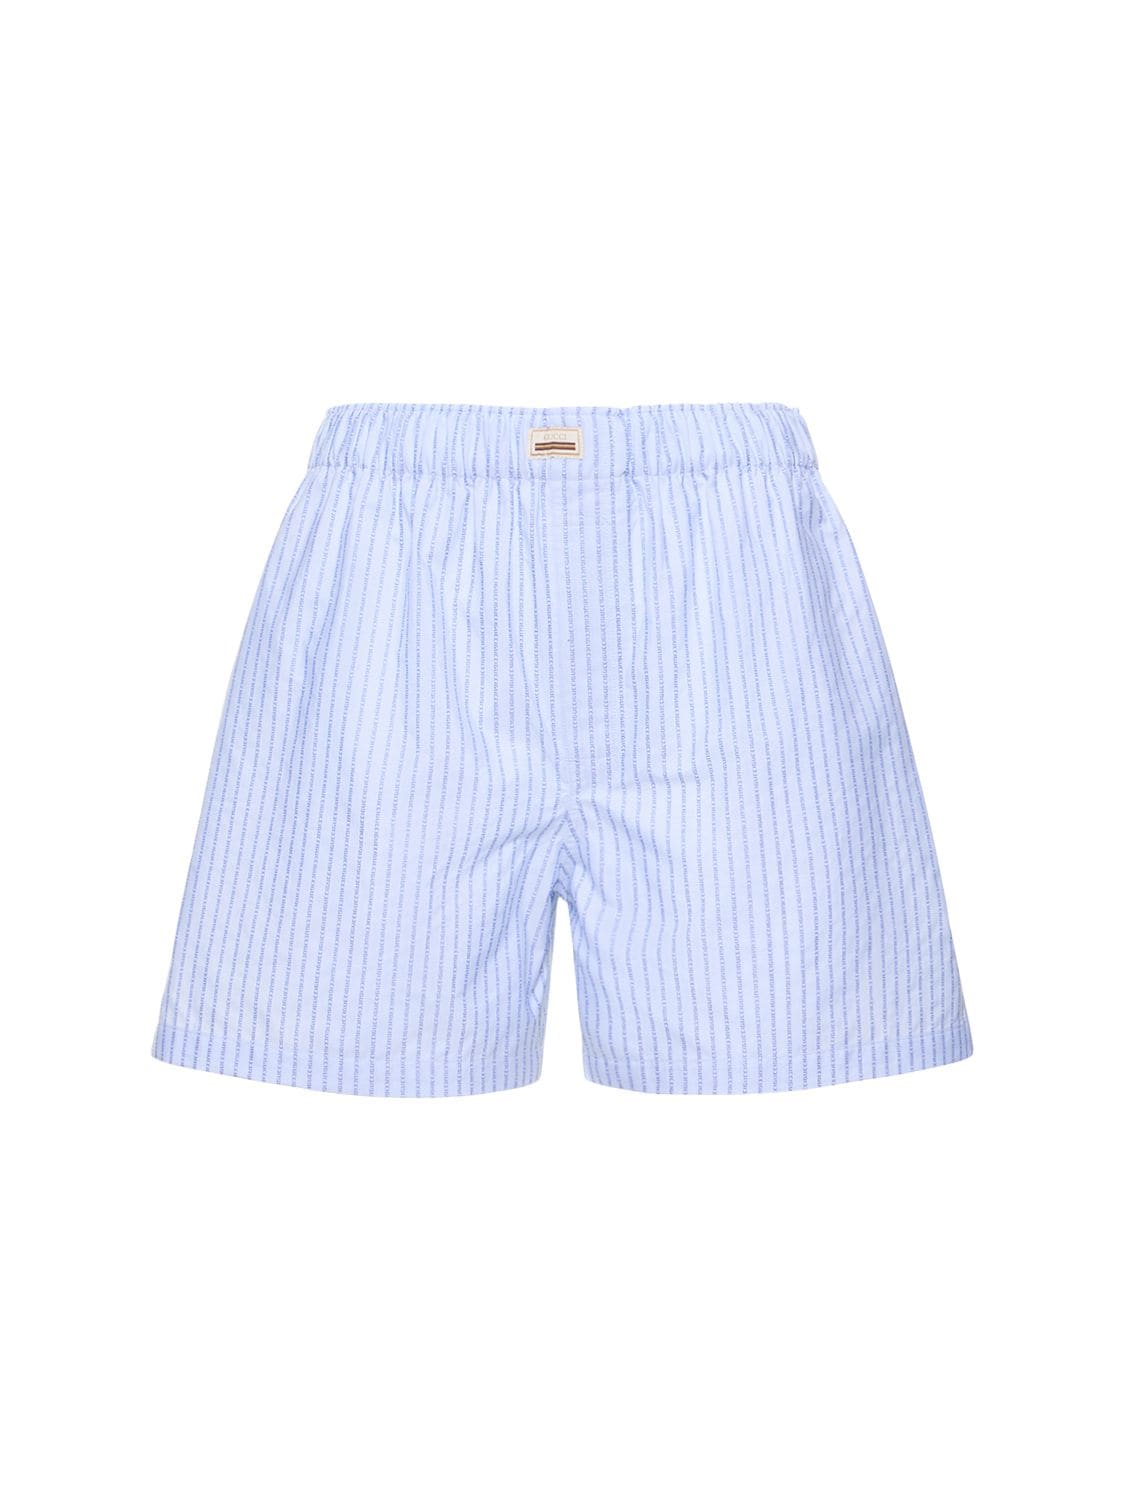 Image of Striped Cotton Boxer Shorts